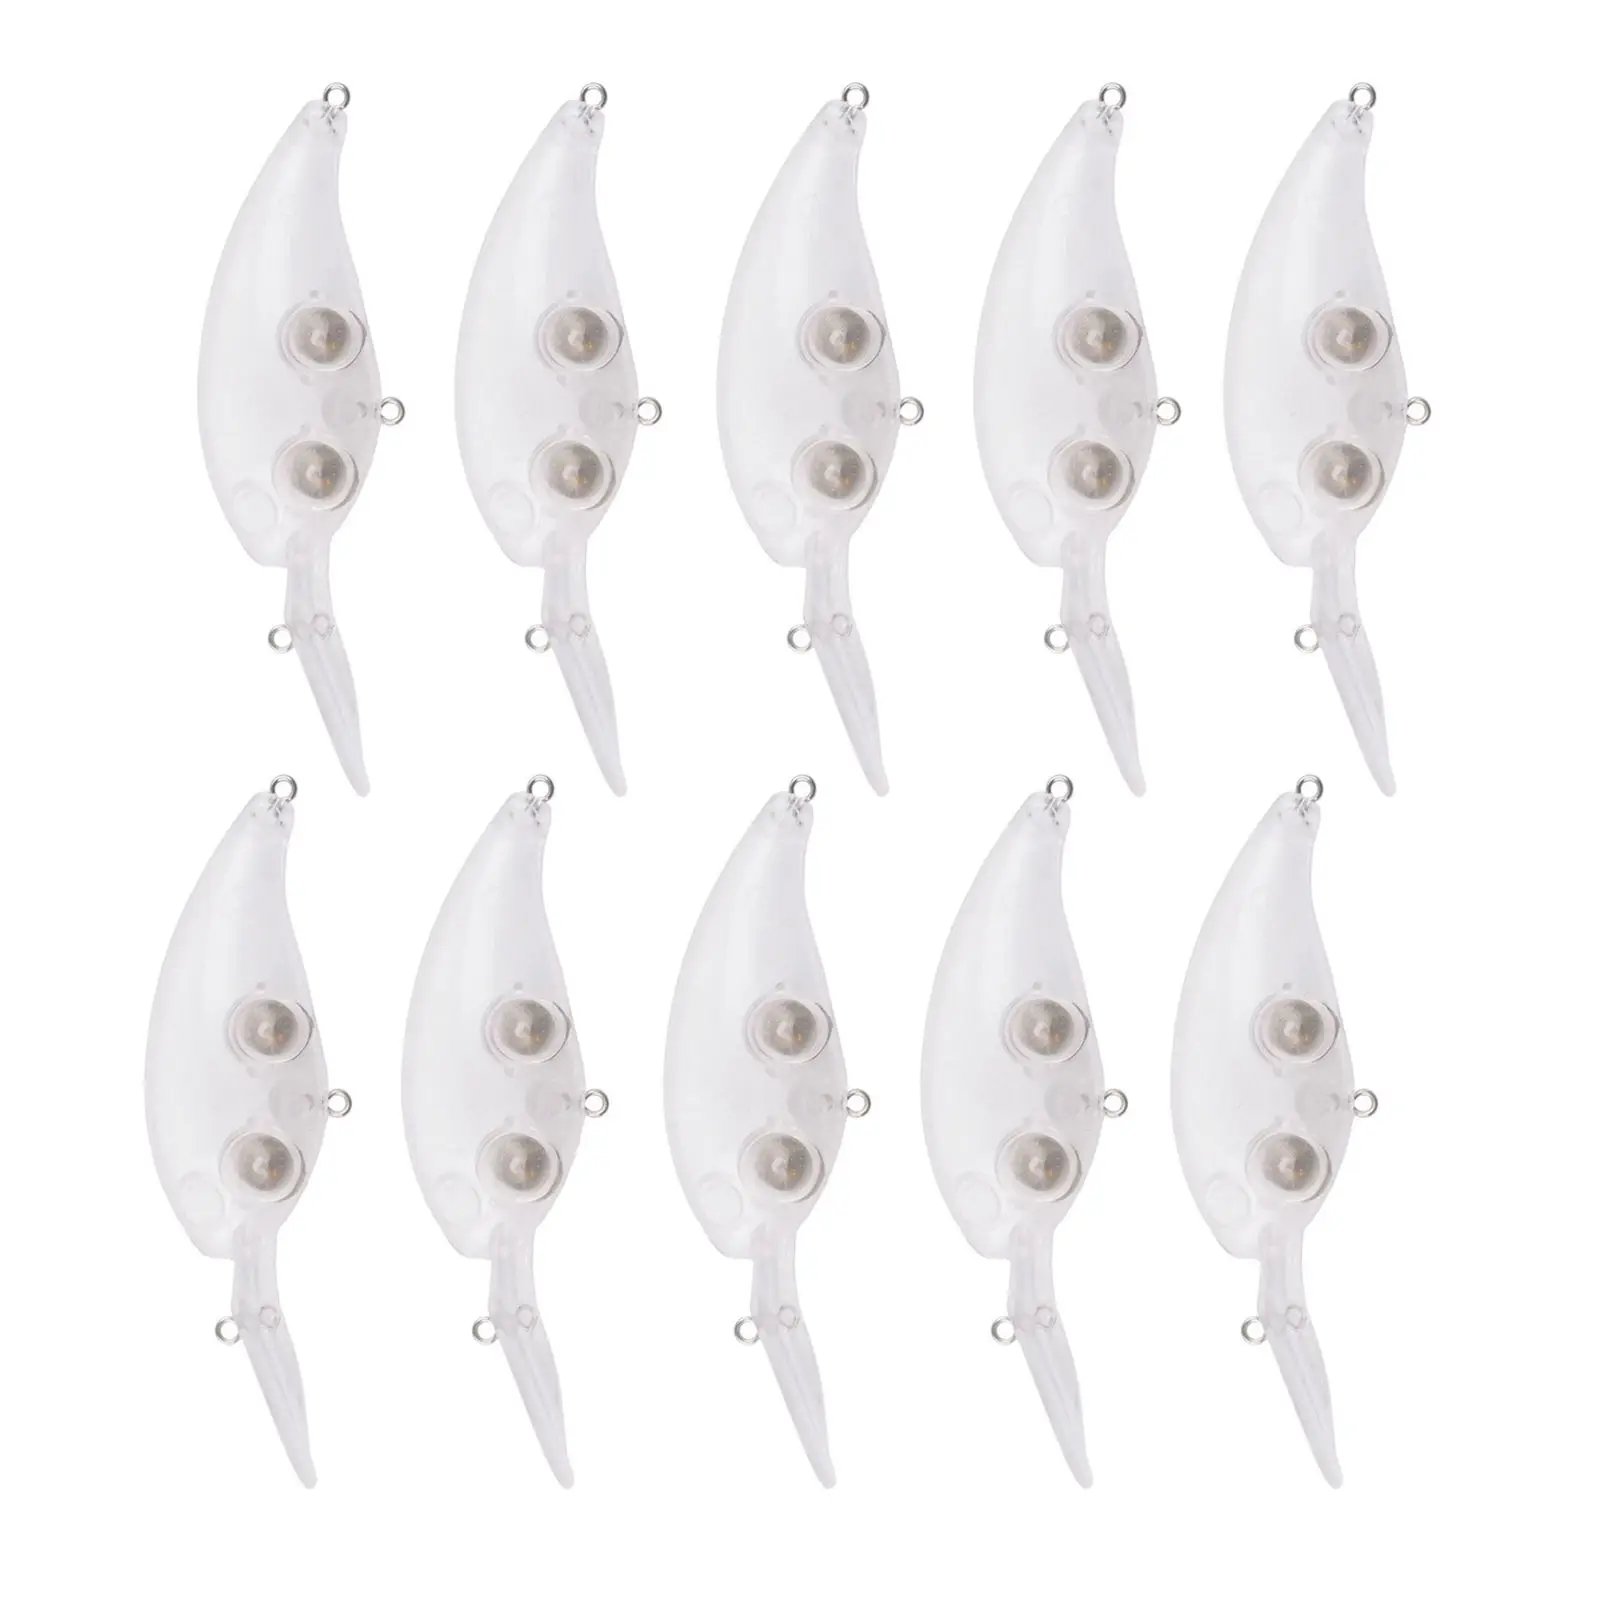 10-room Virgin Lure Body, Unpainted Fishing Baits with Cranberry,